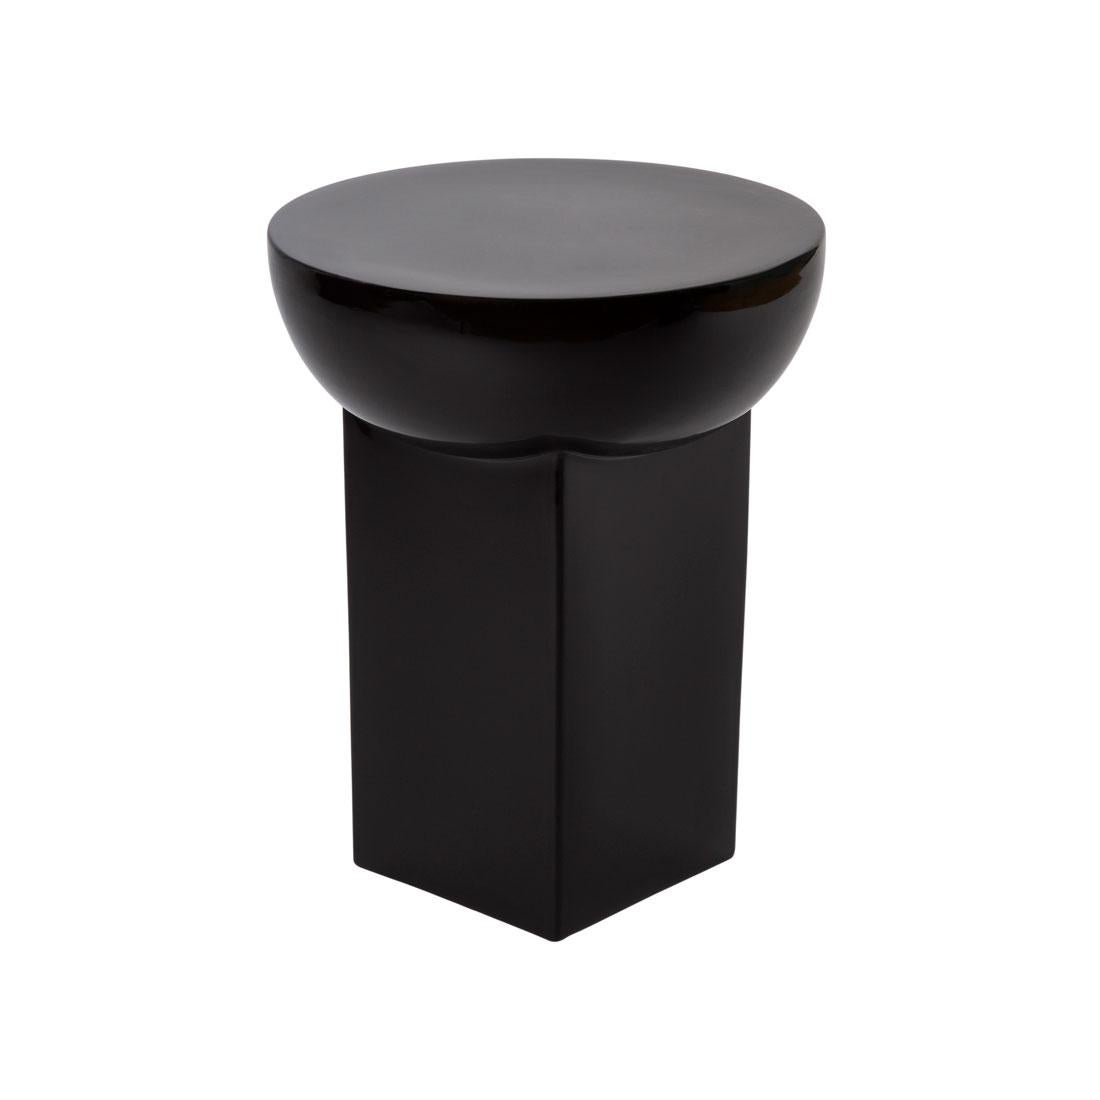 Mila high black side table by Pulpo
Dimensions: D36 x H48 cm
Materials: ceramic

Also available in different colours. 

Three heights from one source, in two different shapes always based on the motto “the round must go into the square” – and